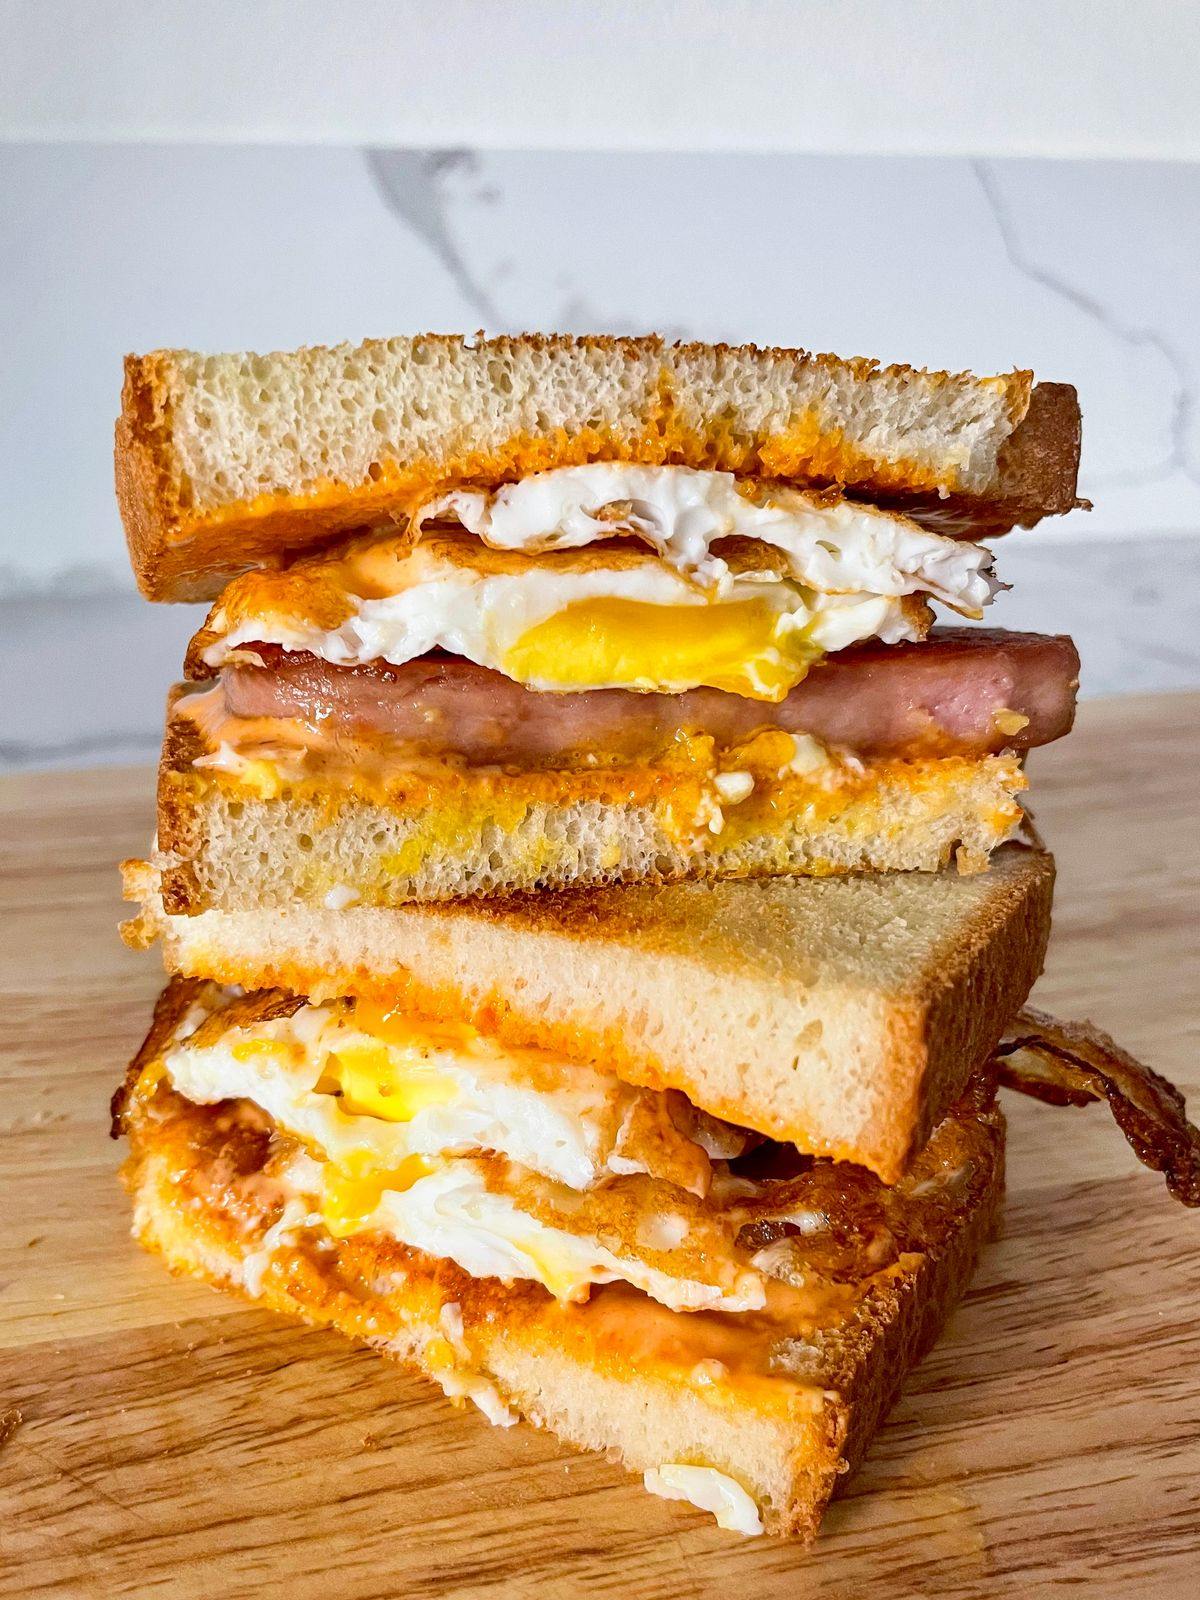 https://toasttohome.com/wp-content/uploads/2021/12/spam-and-eggs-sandwich-scaled-1.jpg